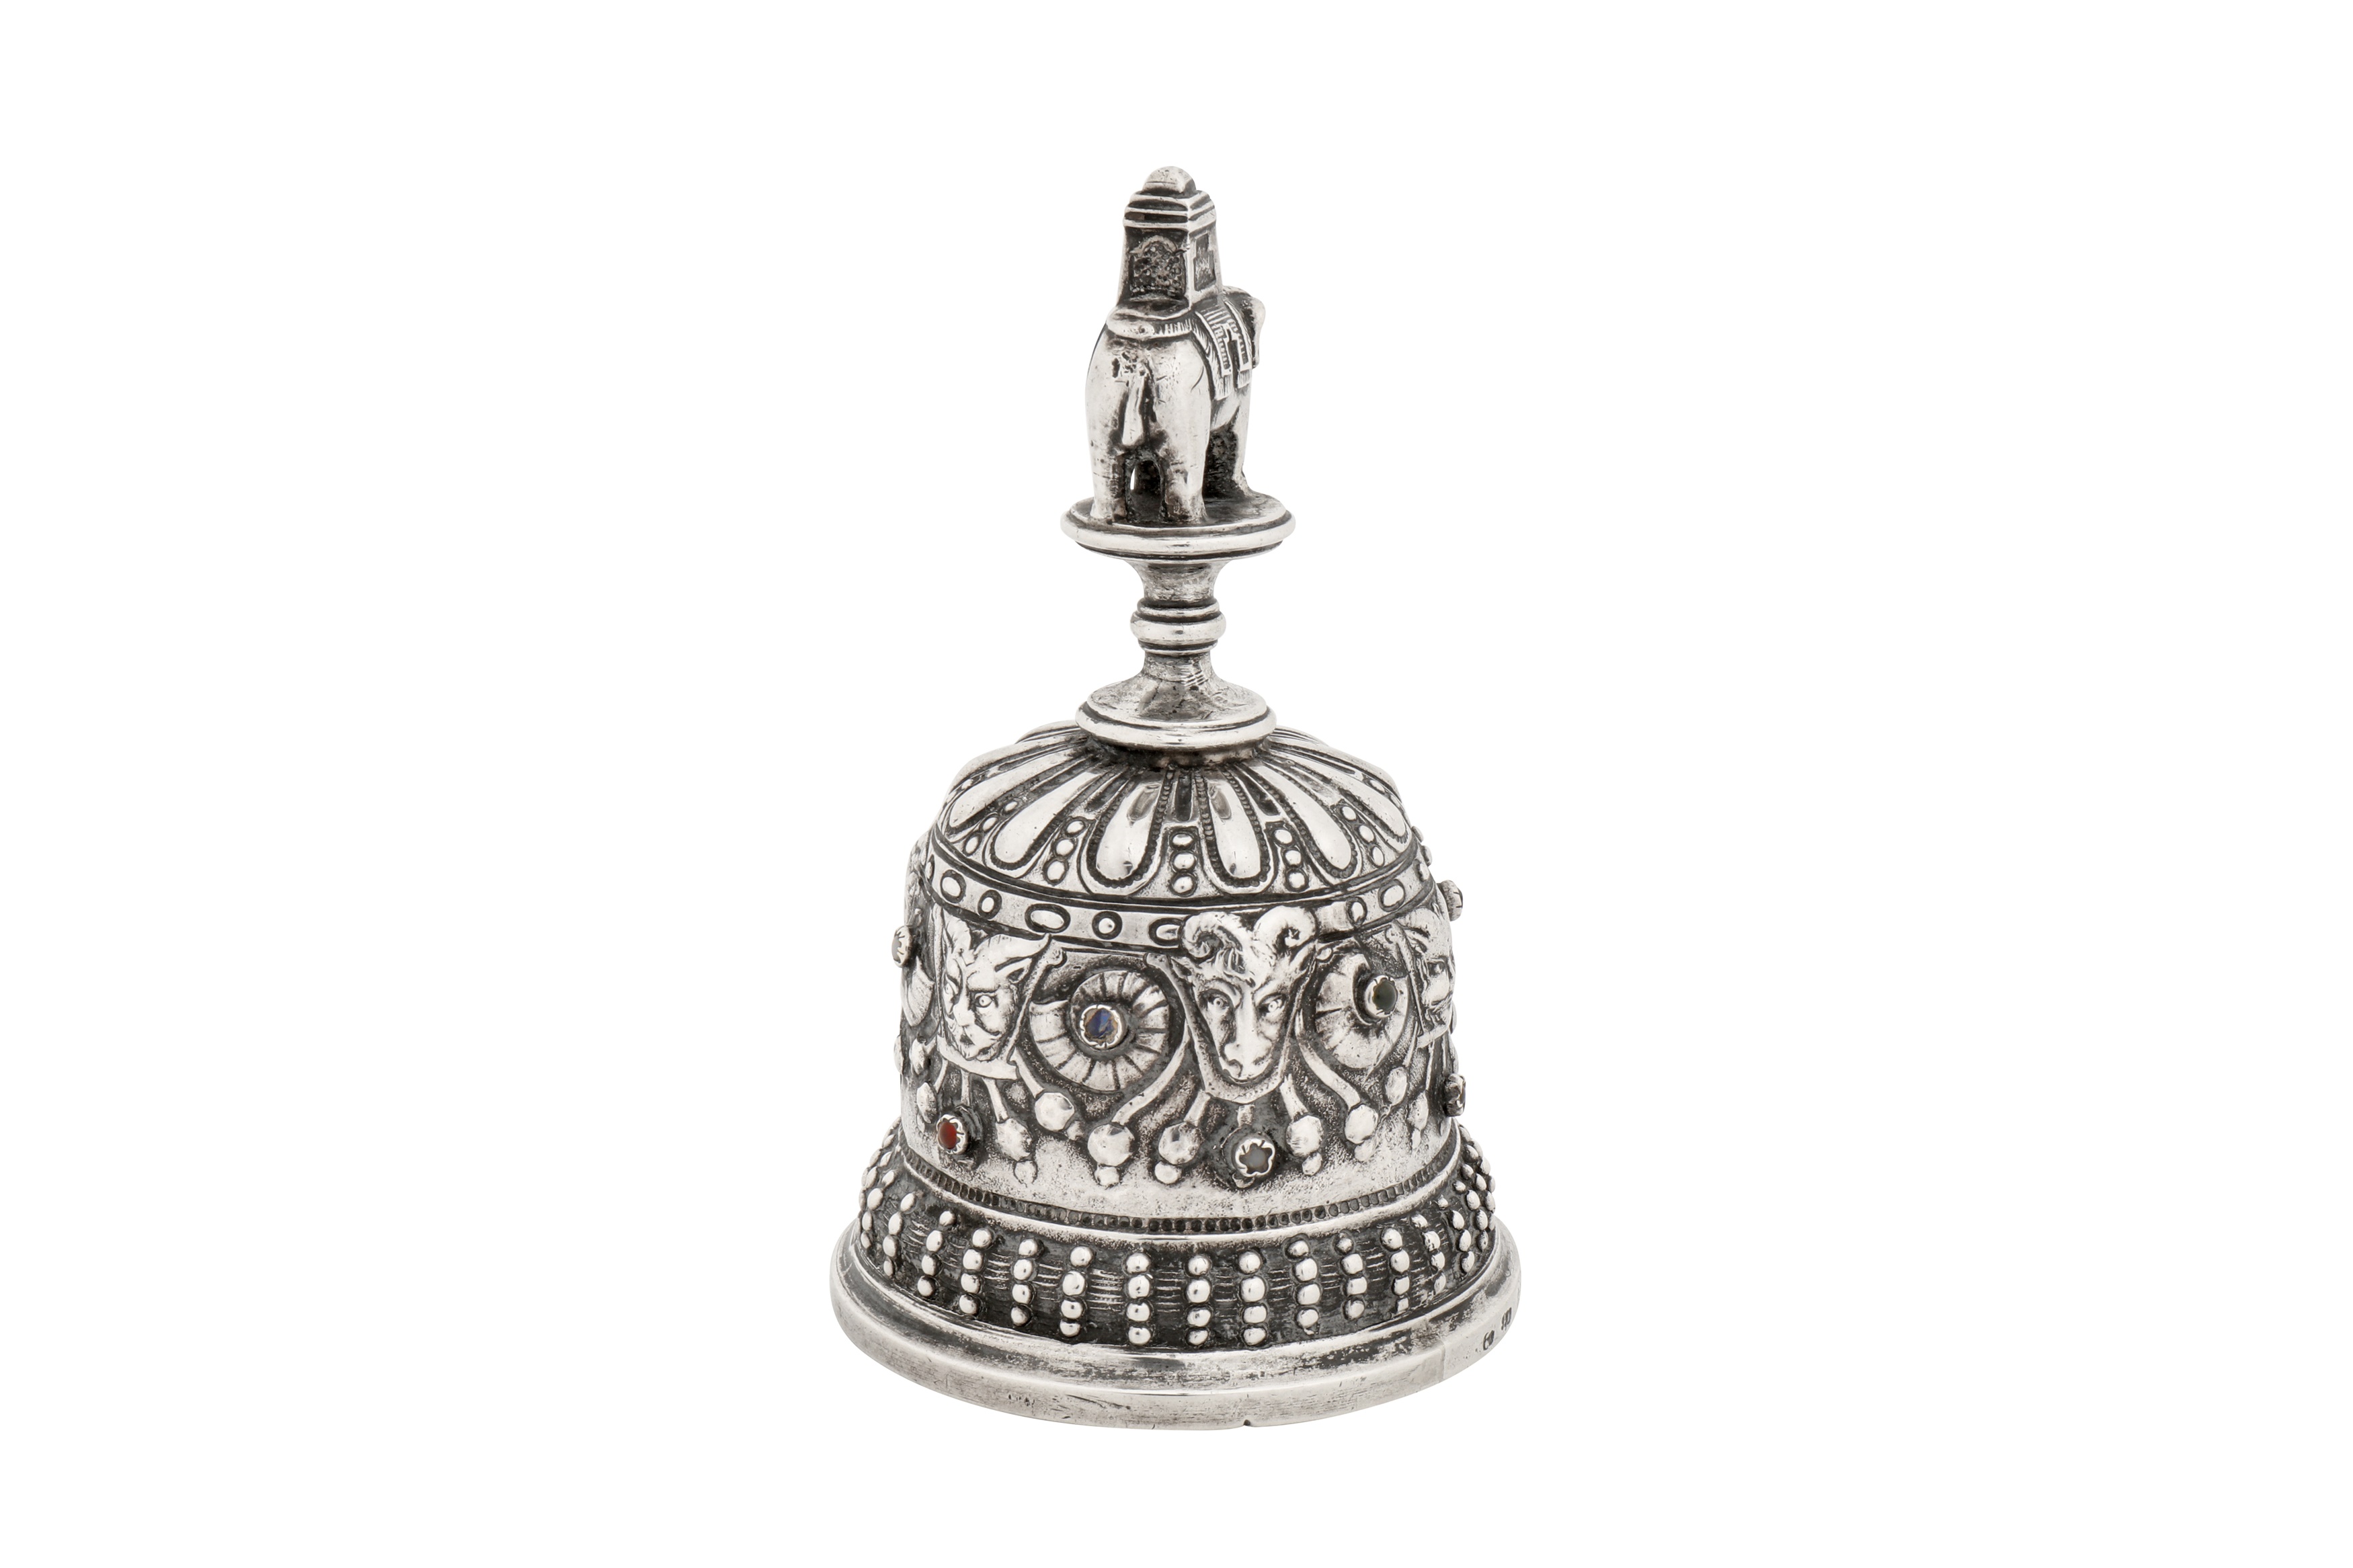 An early 20th century German sterling silver table bell, Bad Kissingen by Simon Rosenau import marks - Image 2 of 7